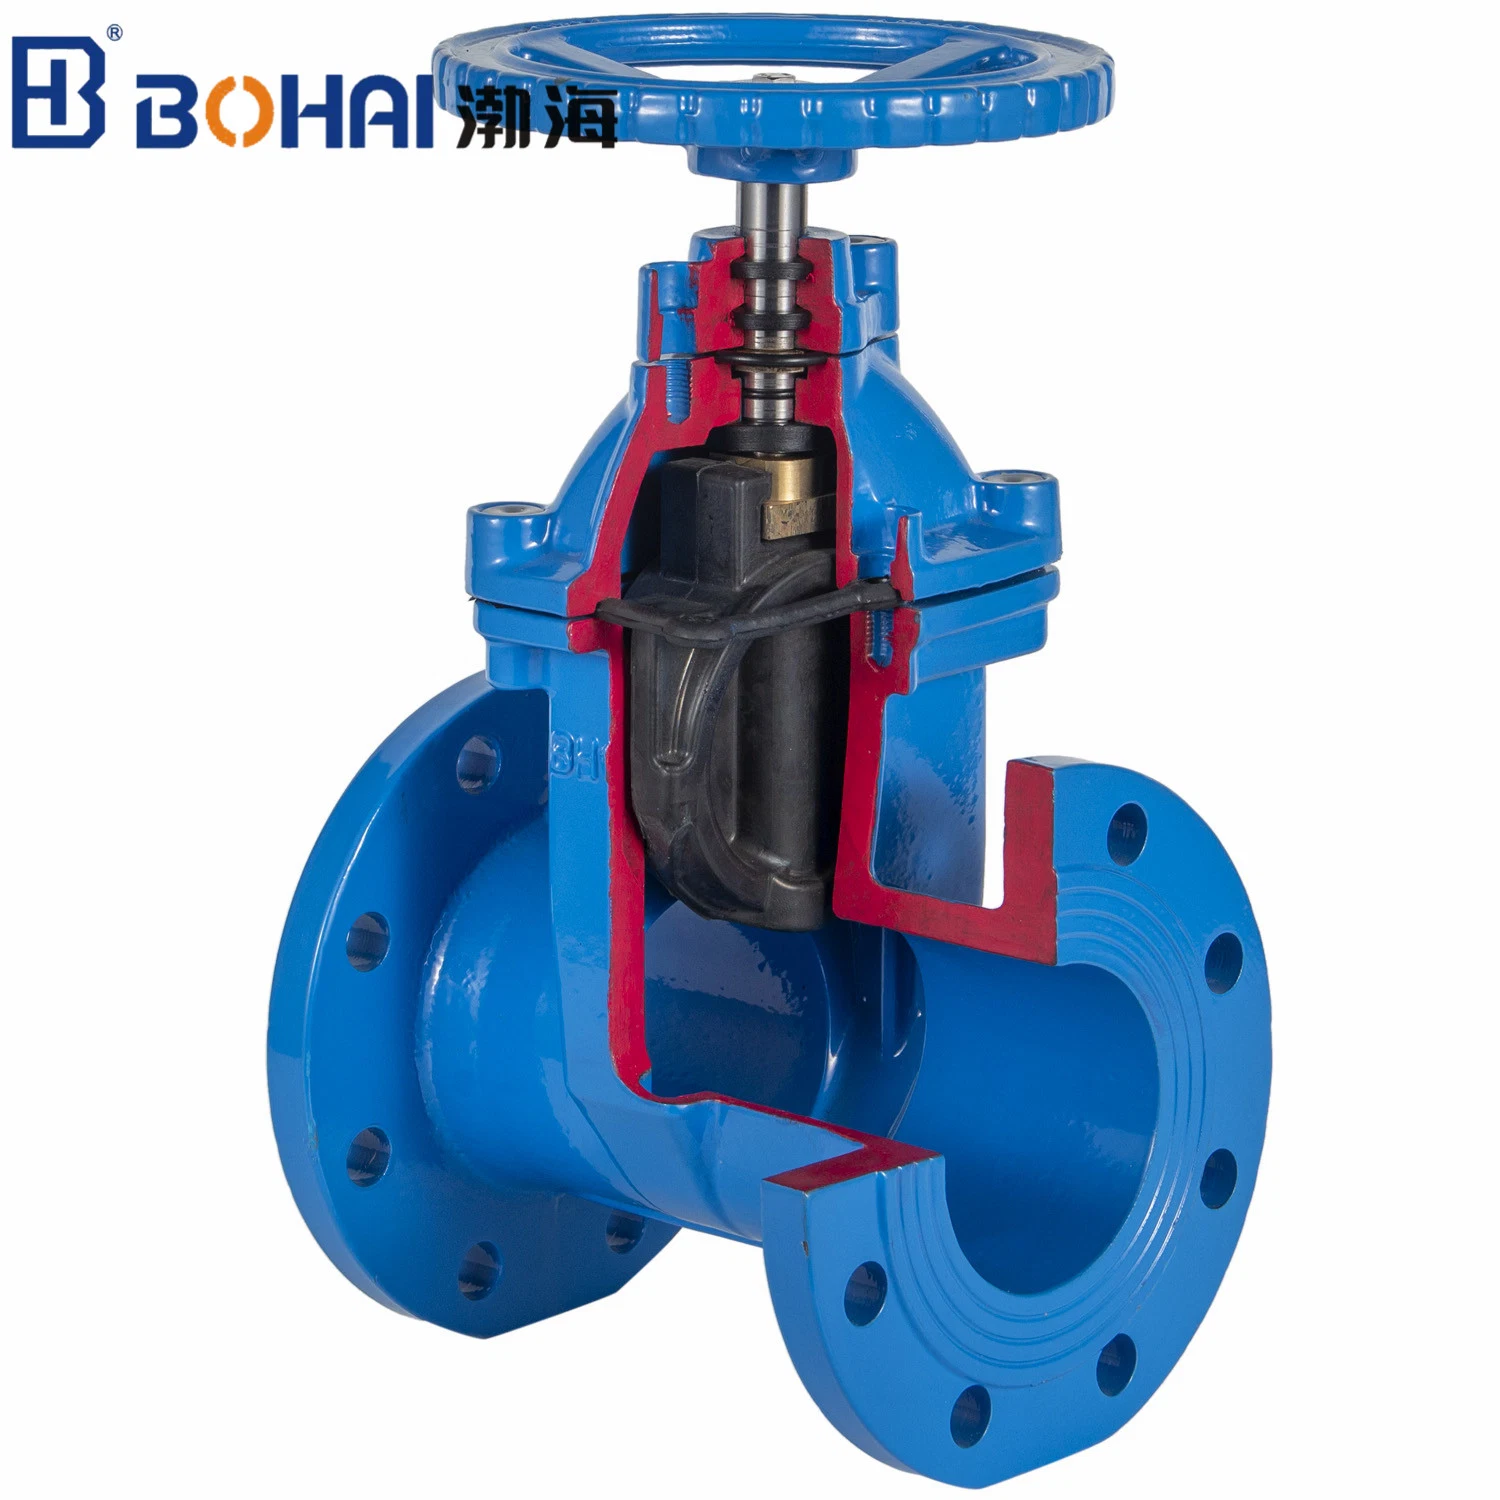 Z45X Non Rising Resilient Soft Seat Flanged Pn 16 Industrial Control Gate Valve